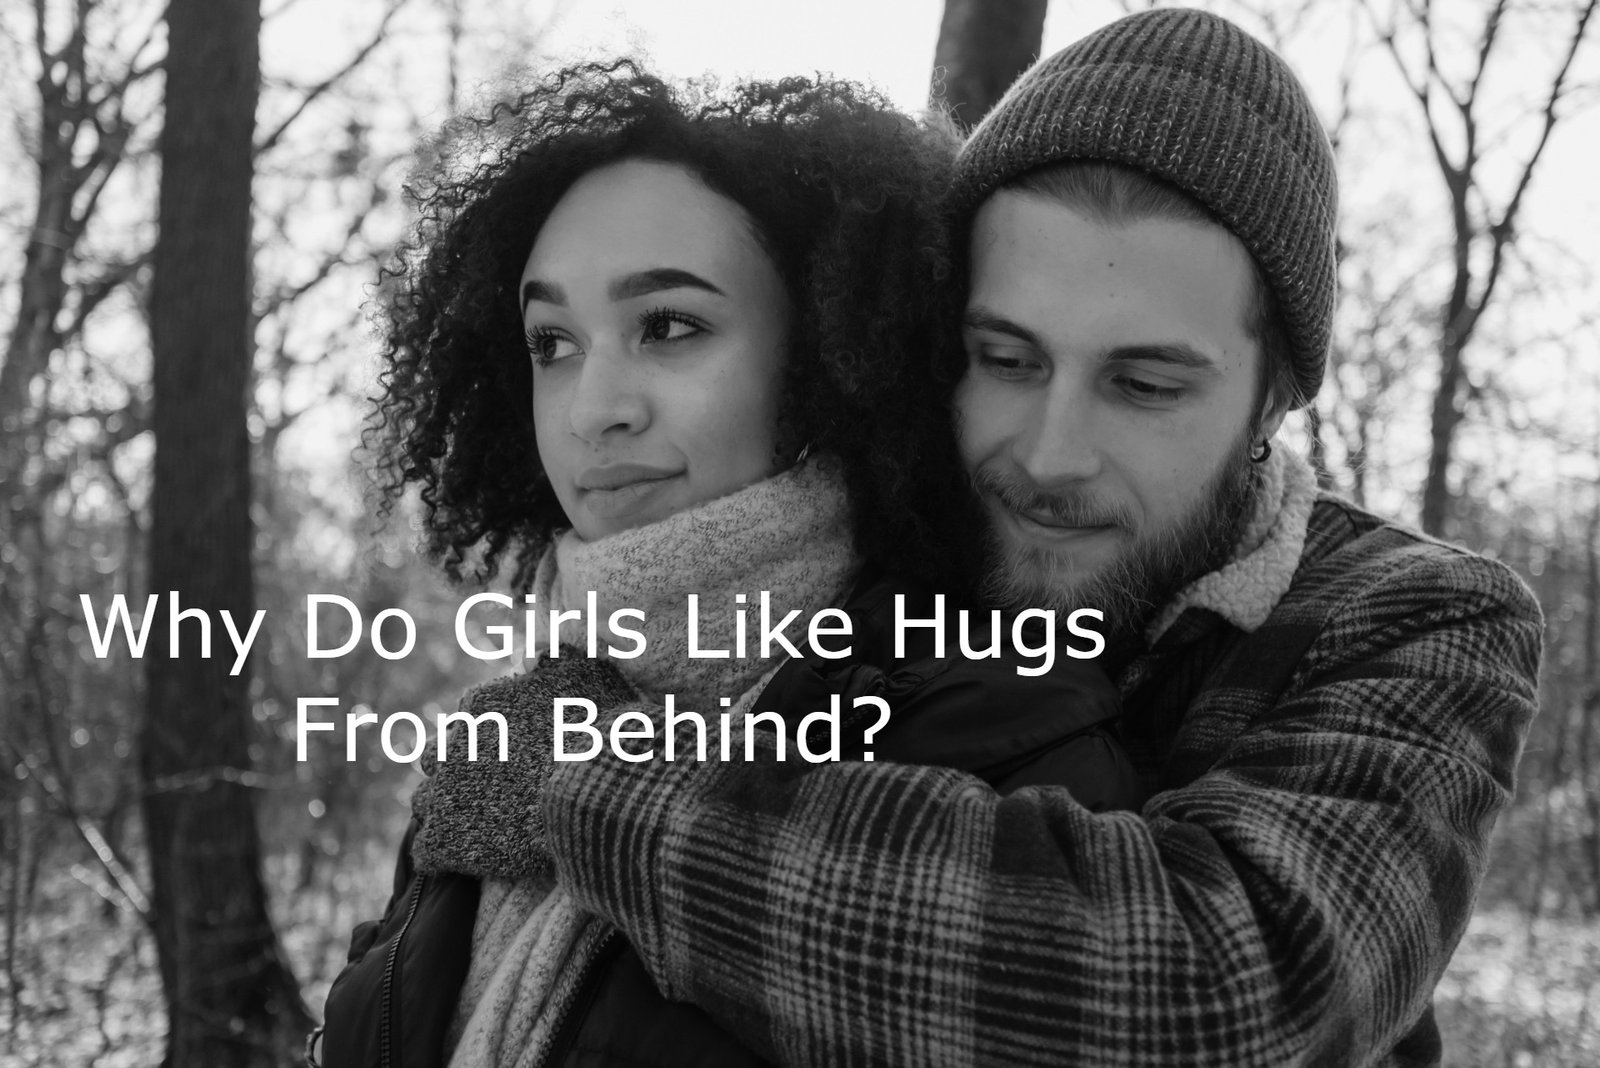 Why Do Girls Like Hugs From Behind?